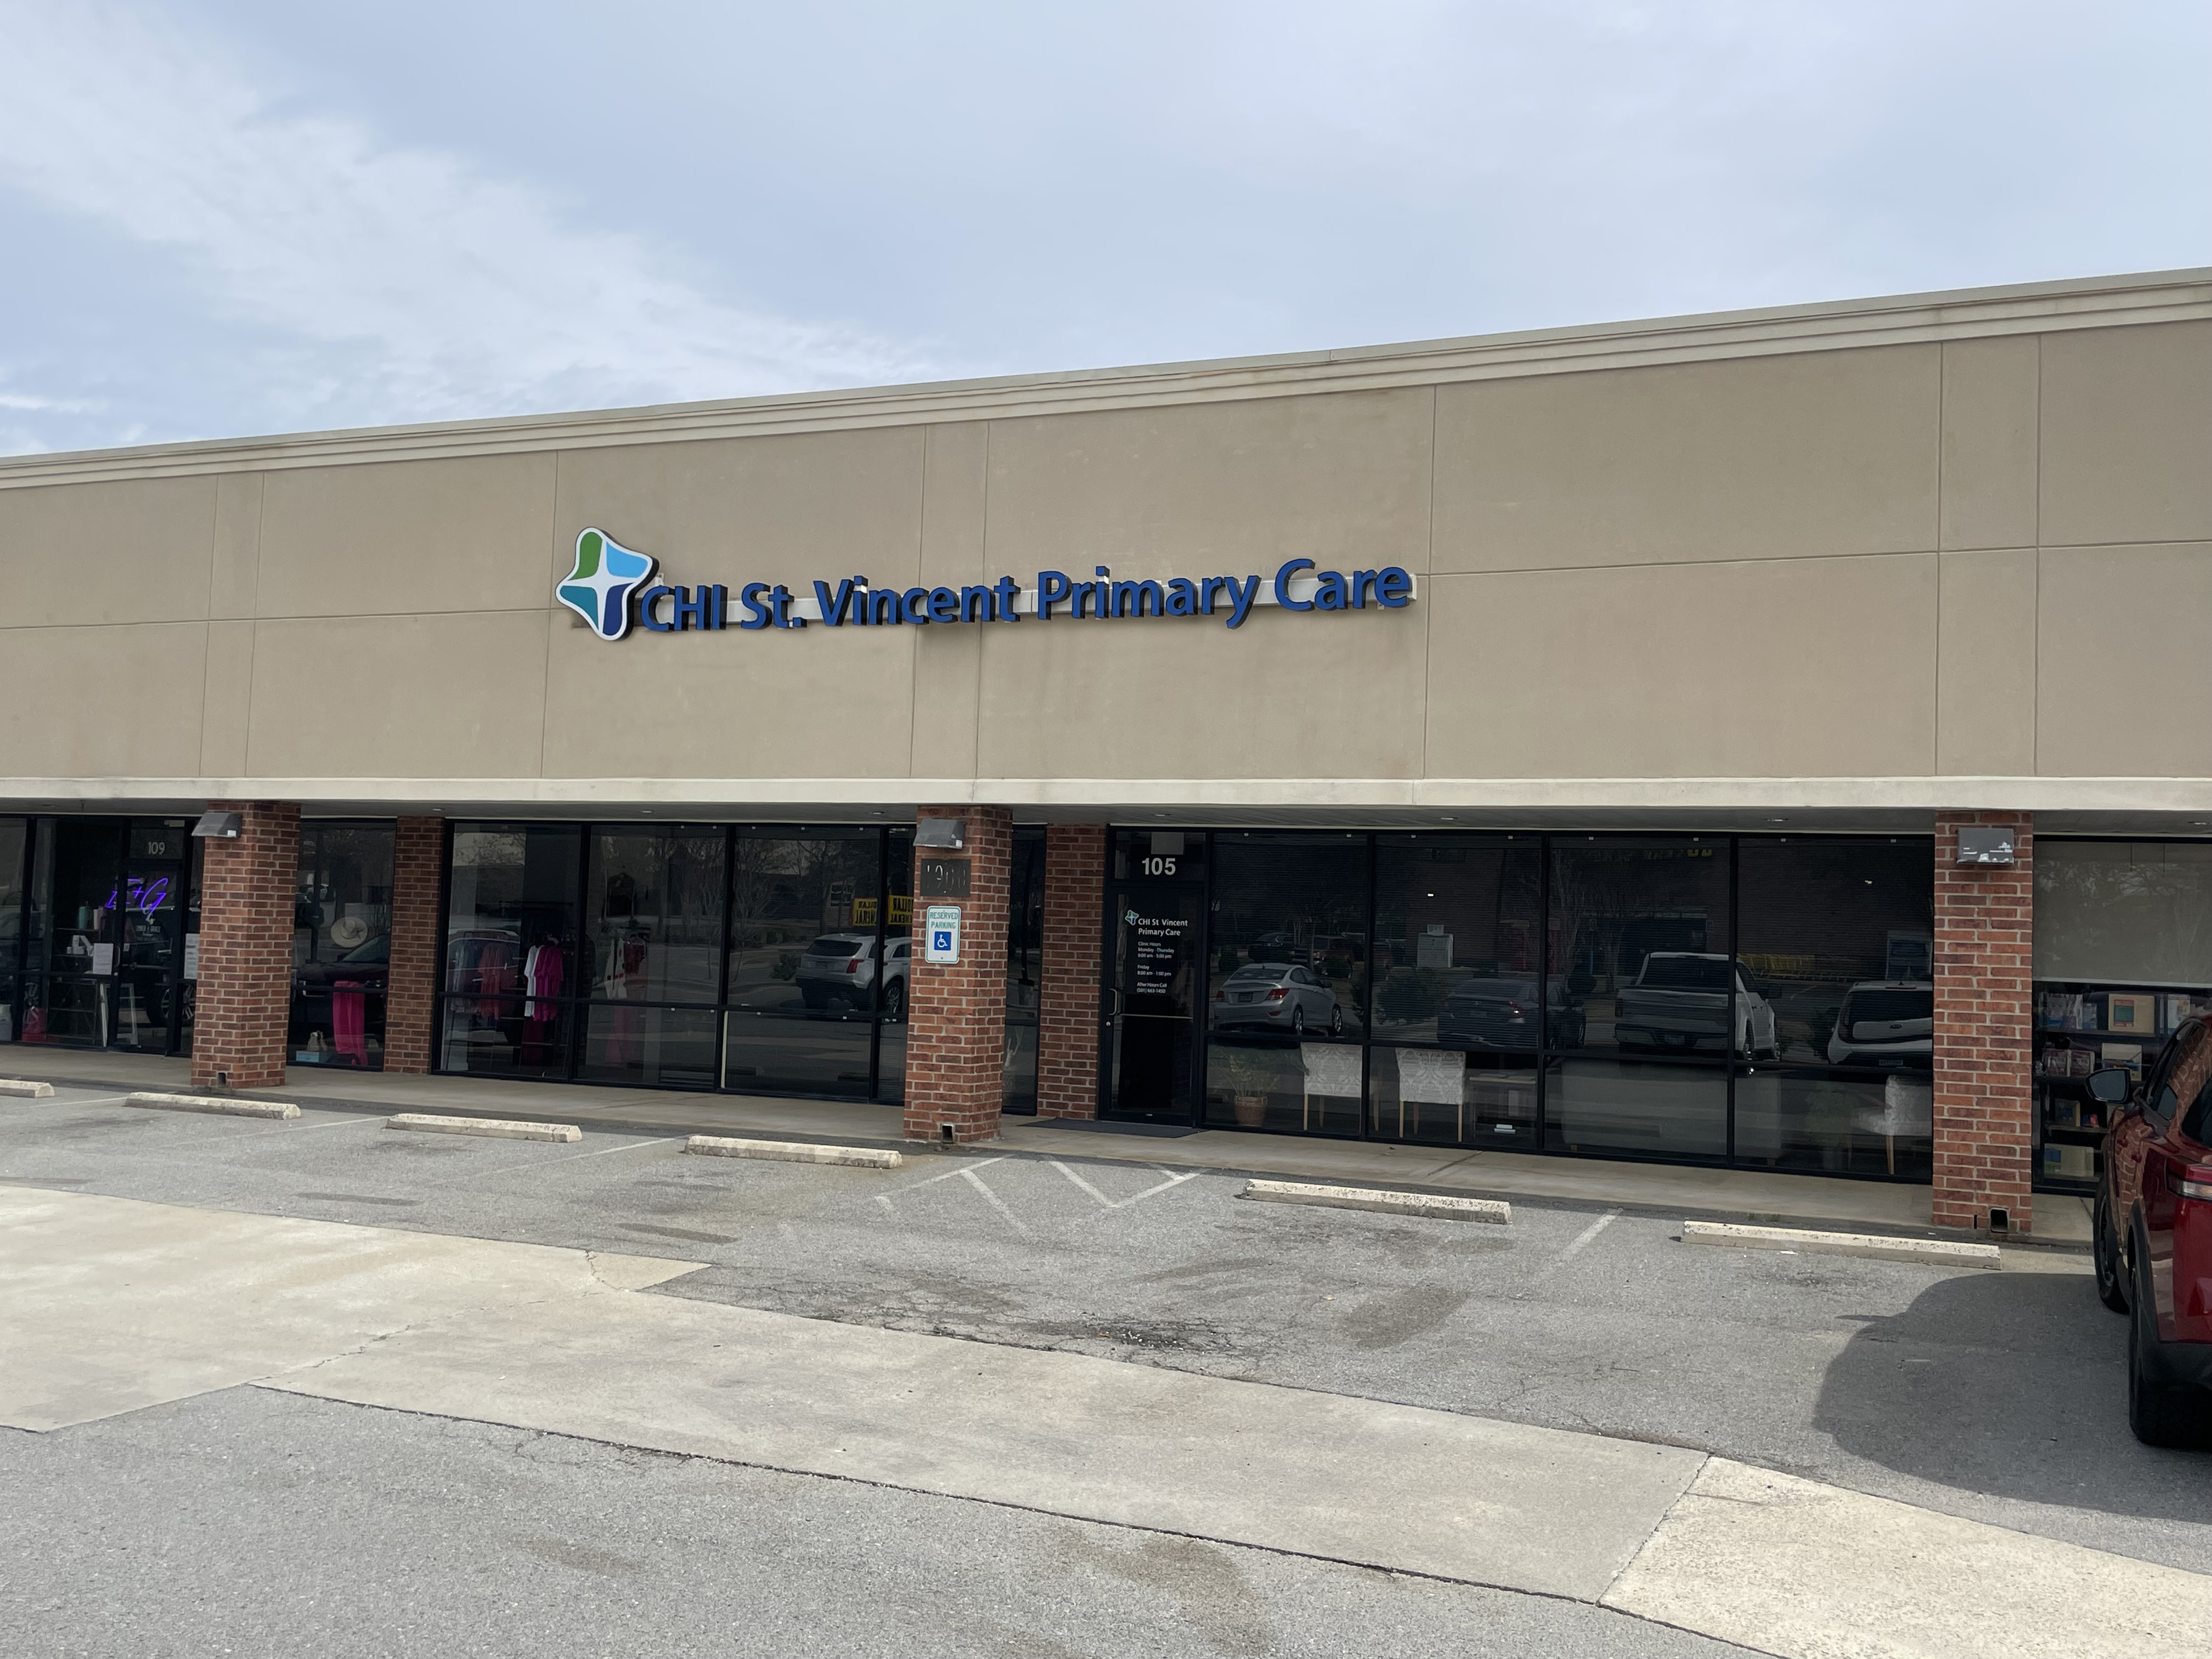 CHI St. Vincent Primary Care - Maumelle